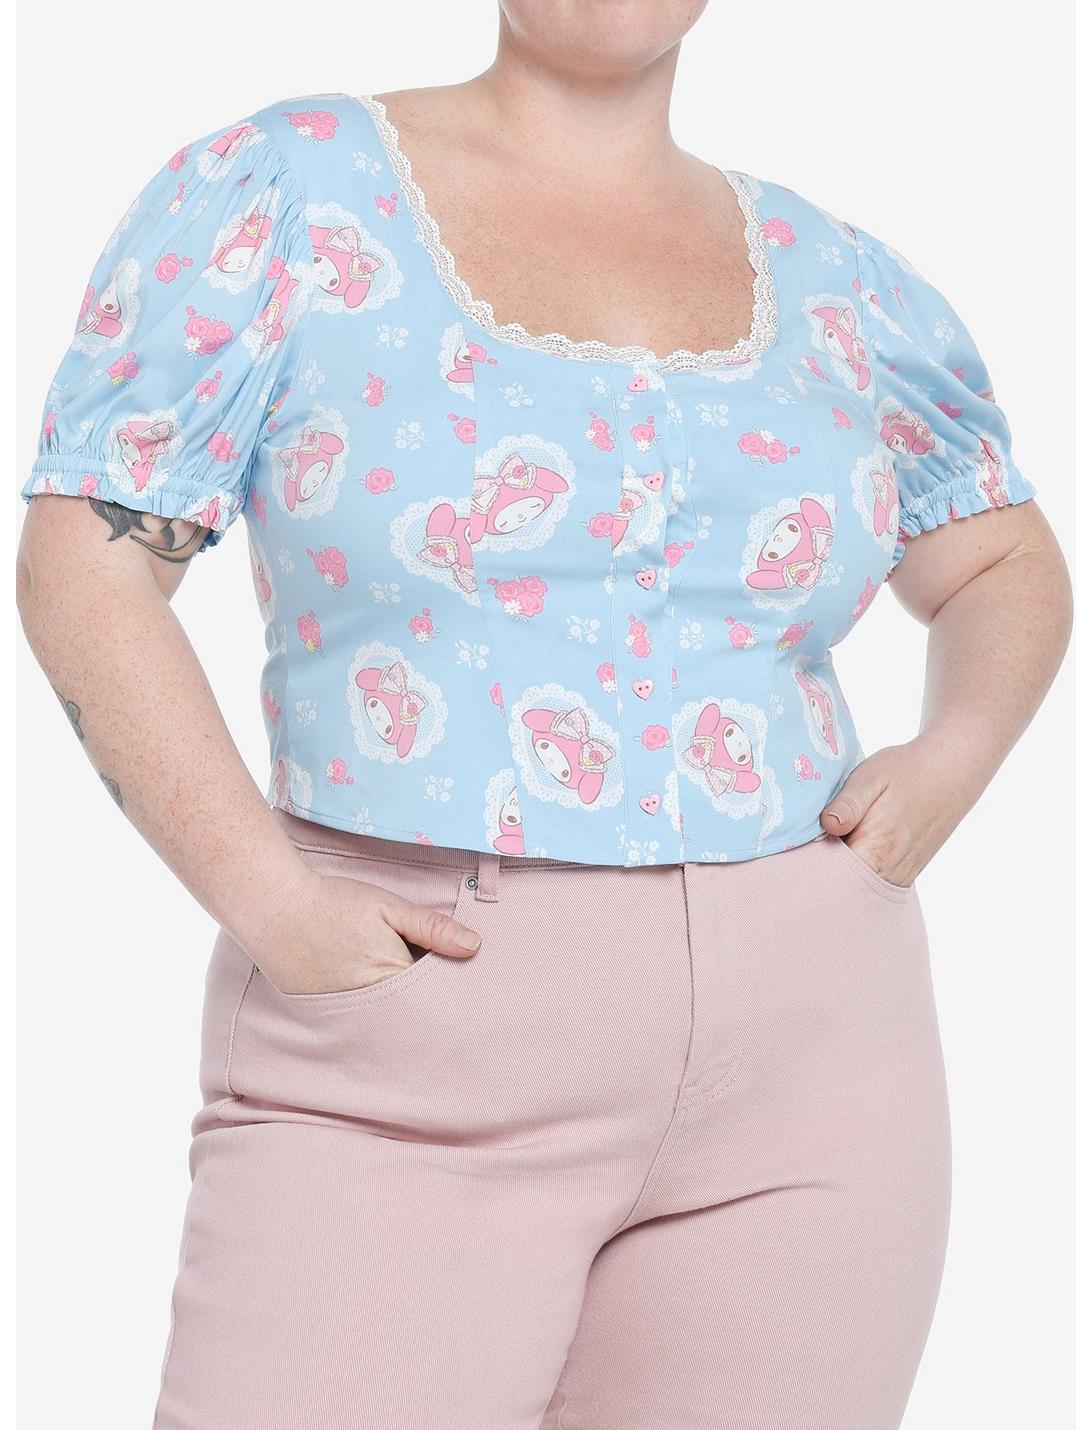 My Melody Lace Peasant Girls Woven Top Plus Size, MULTI, hi-res